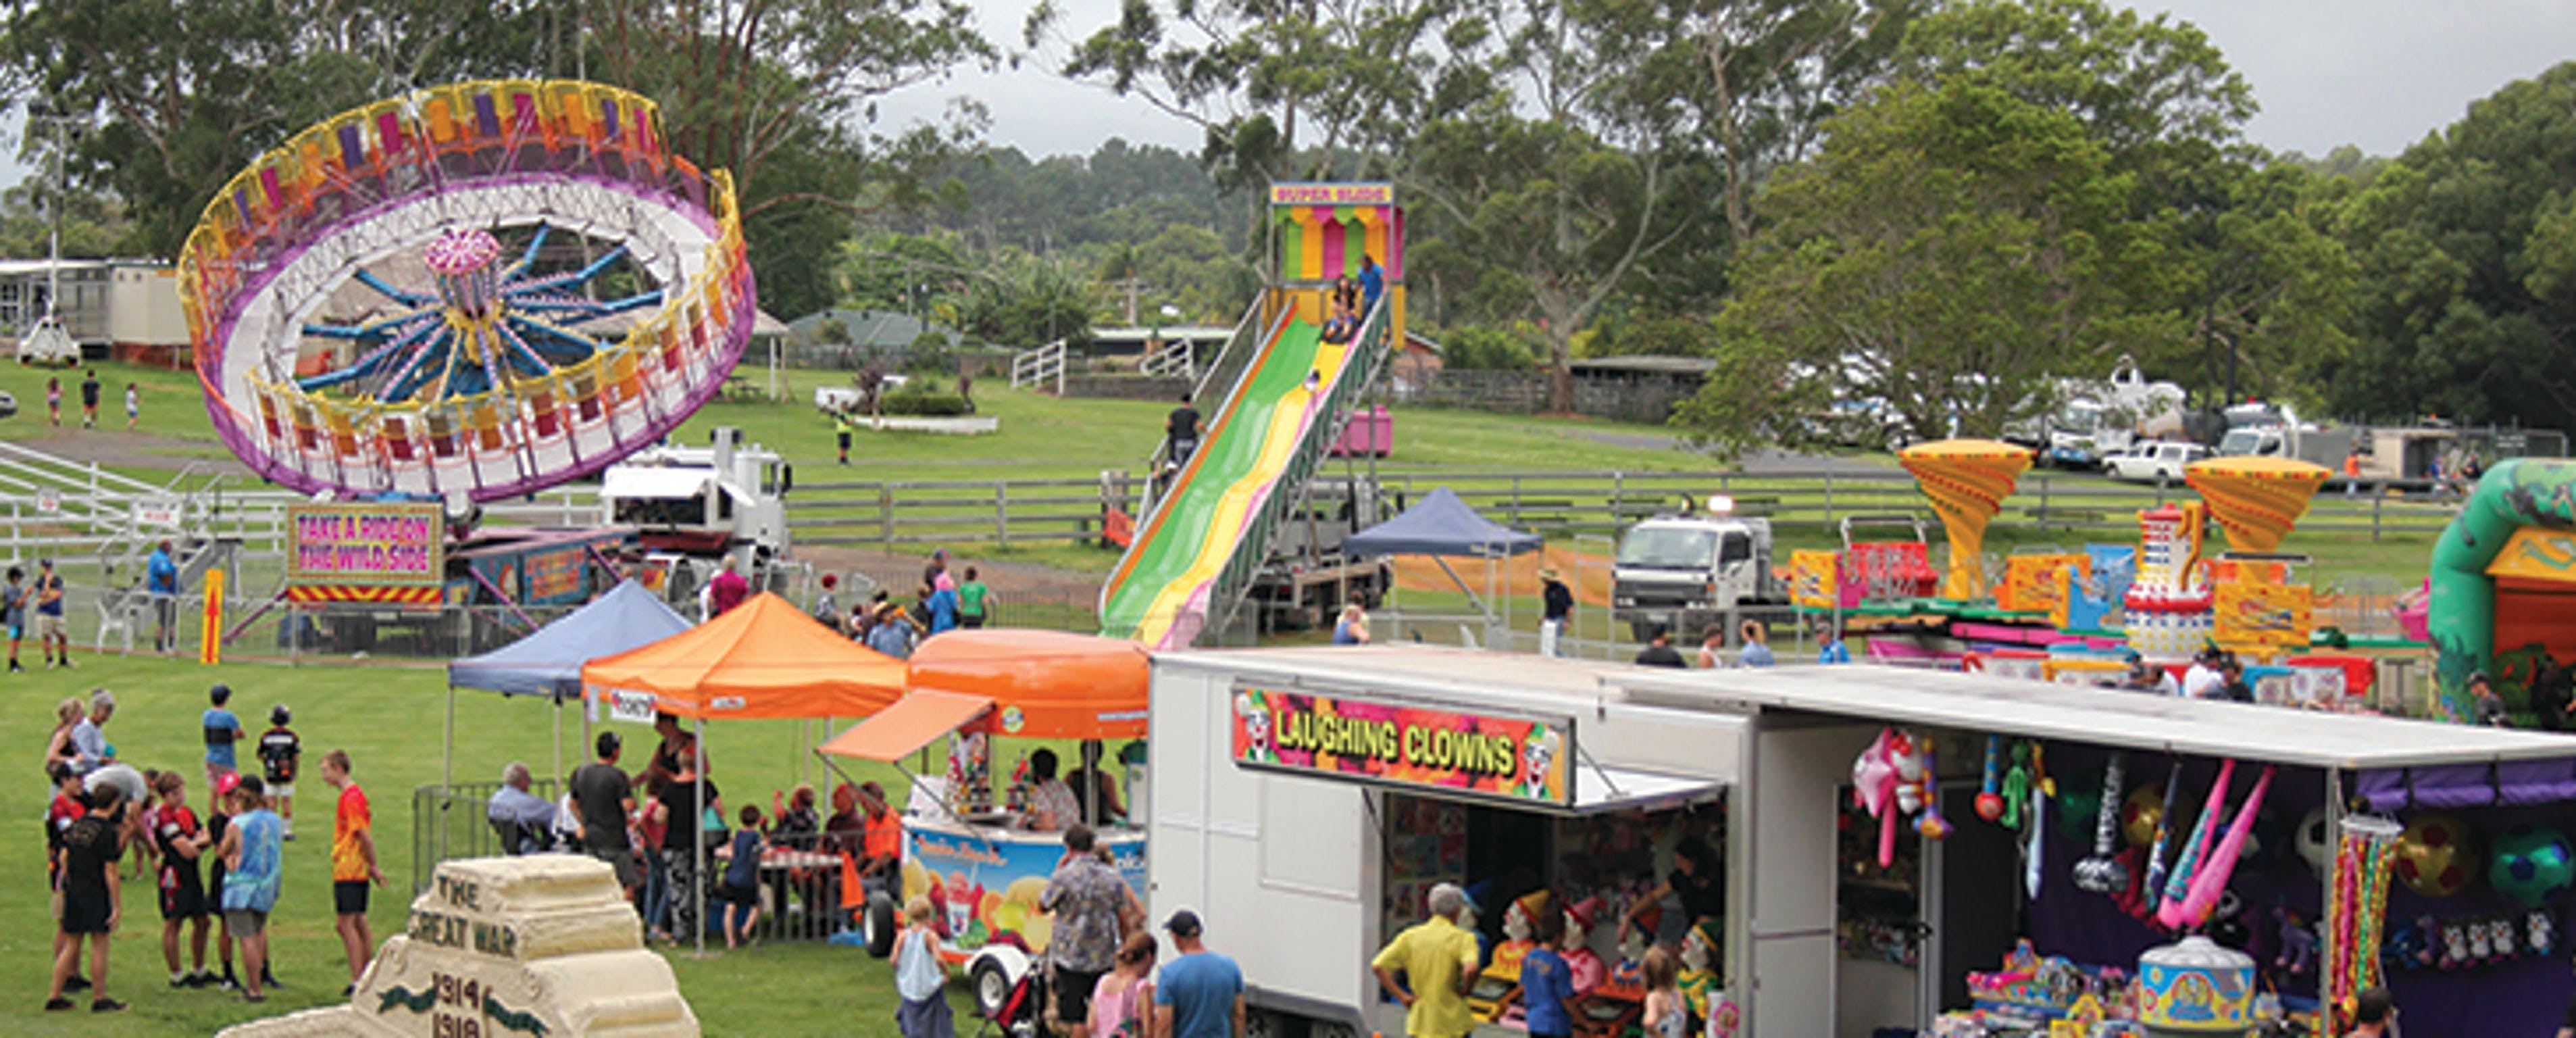 Alstonville Agricultural Society Show - Pubs Sydney